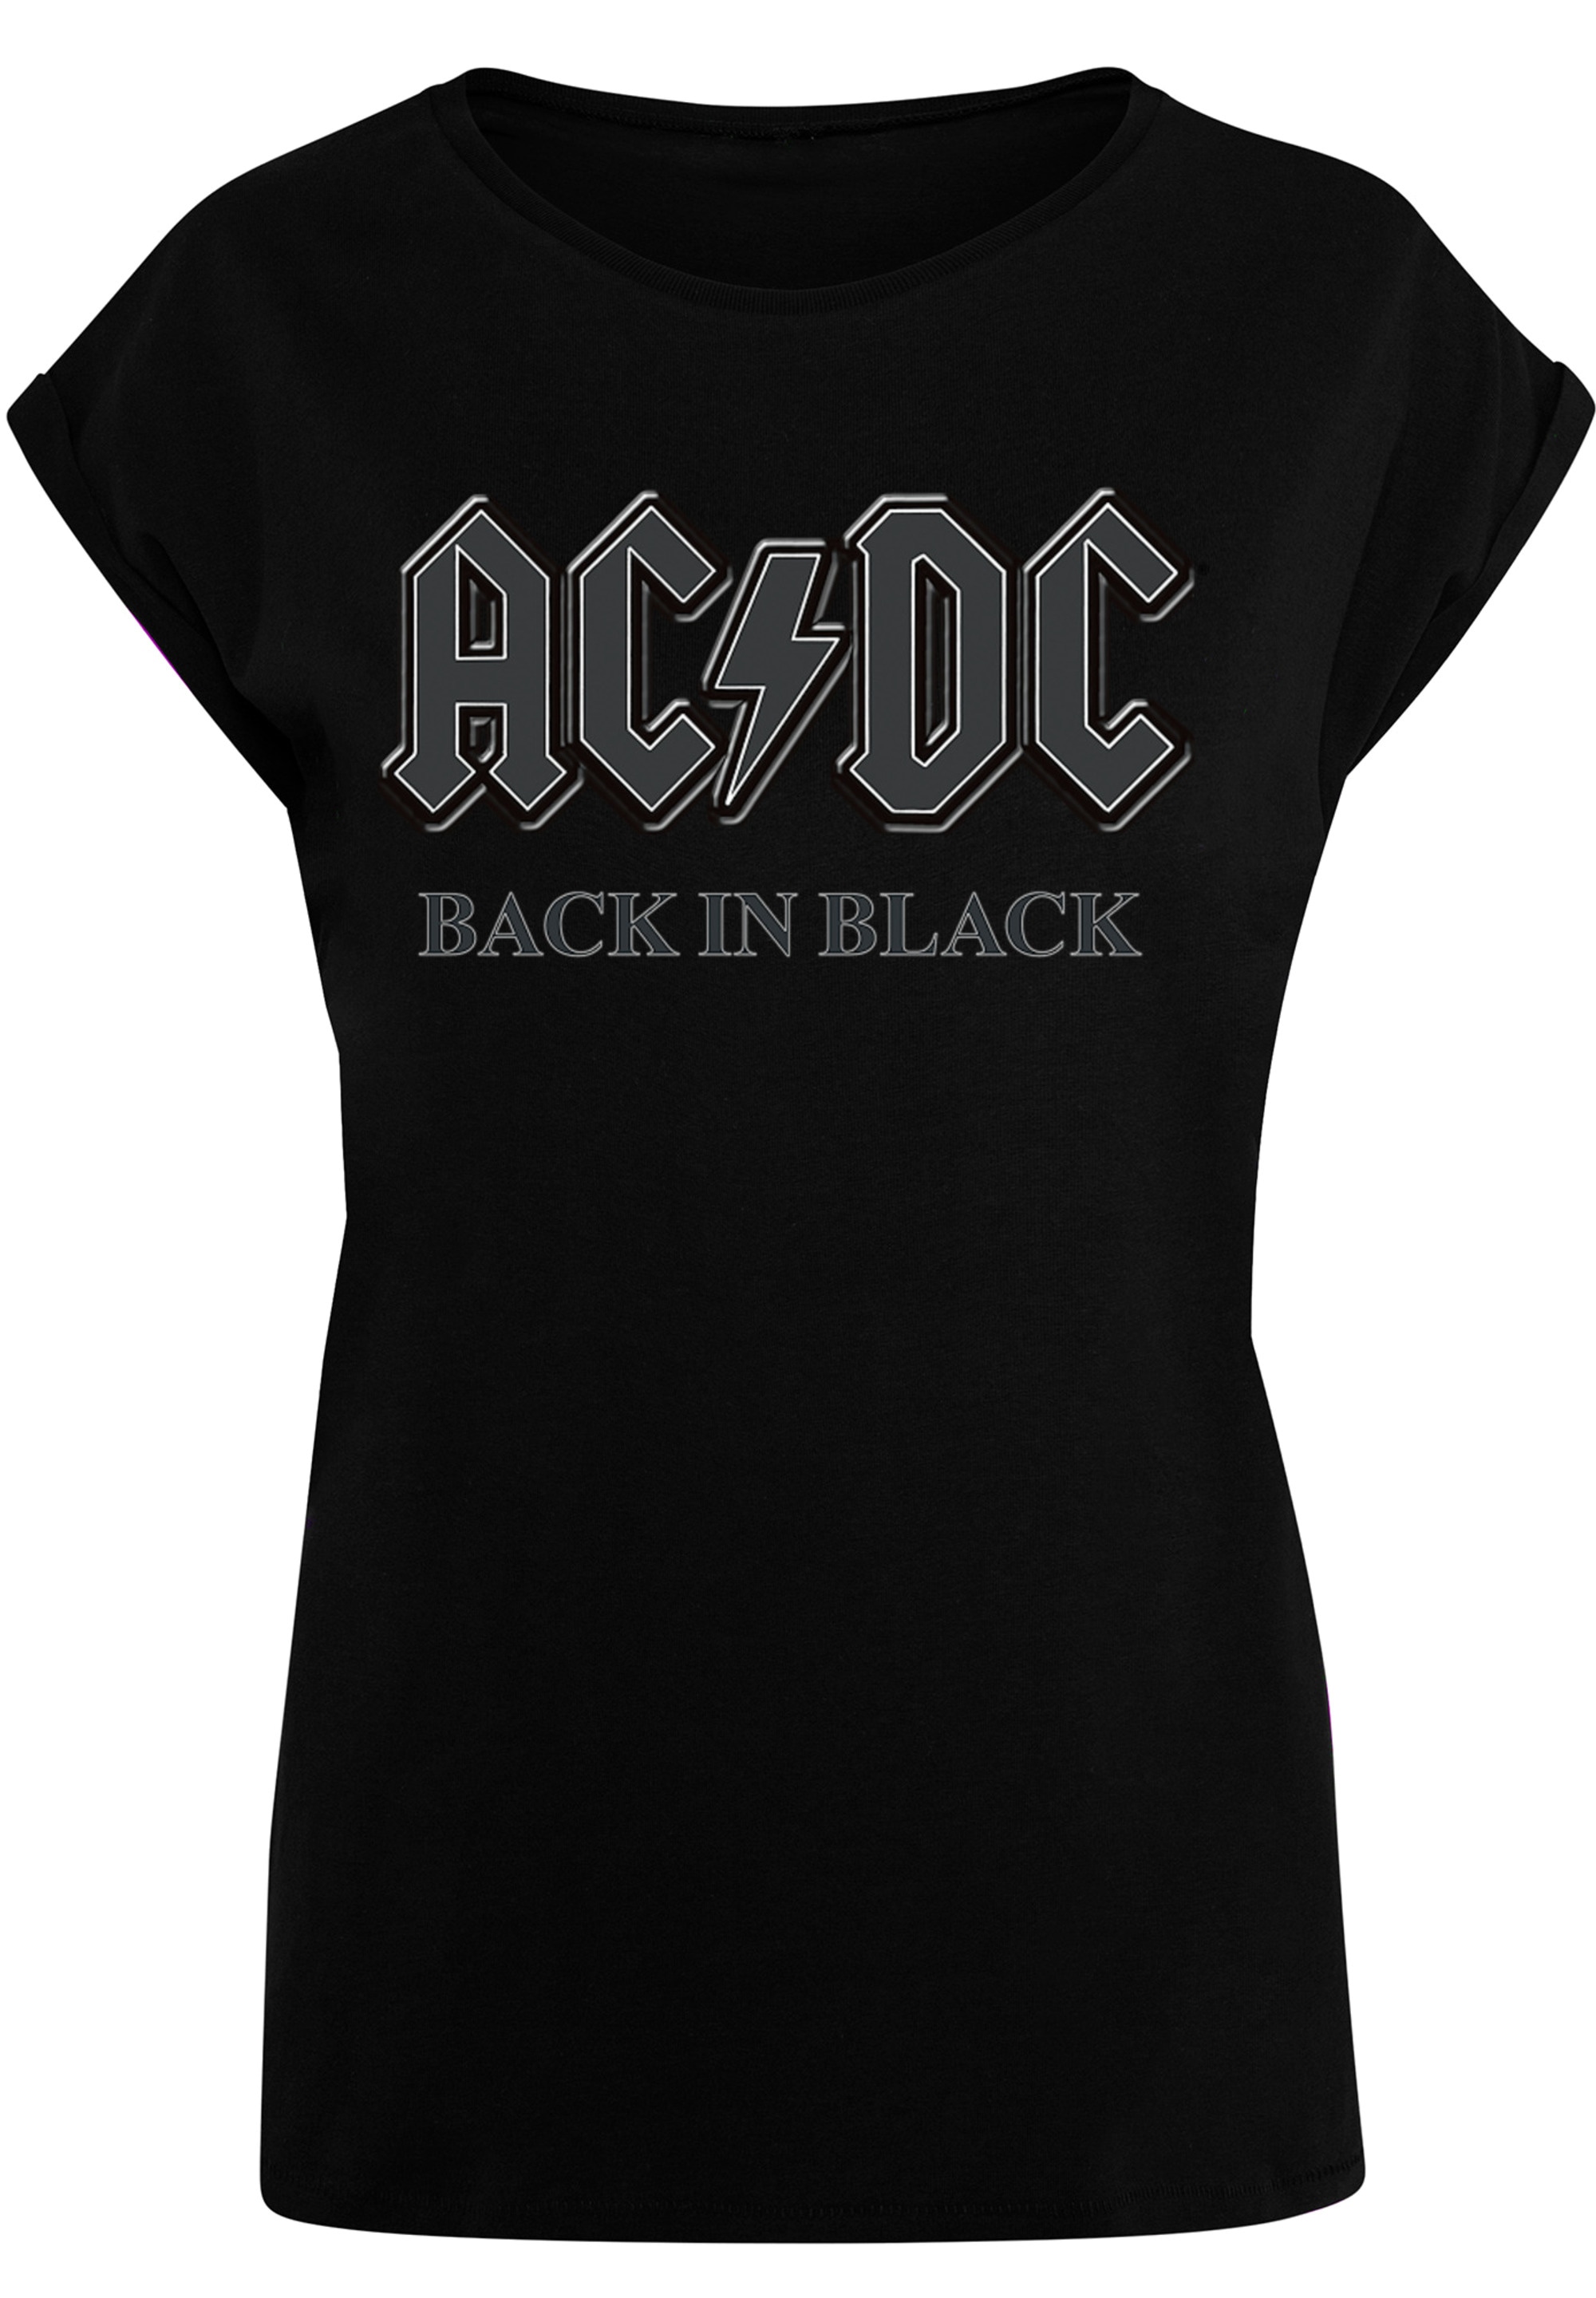 Back »PLUS Print SIZE ACDC Black«, in F4NT4STIC kaufen T-Shirt